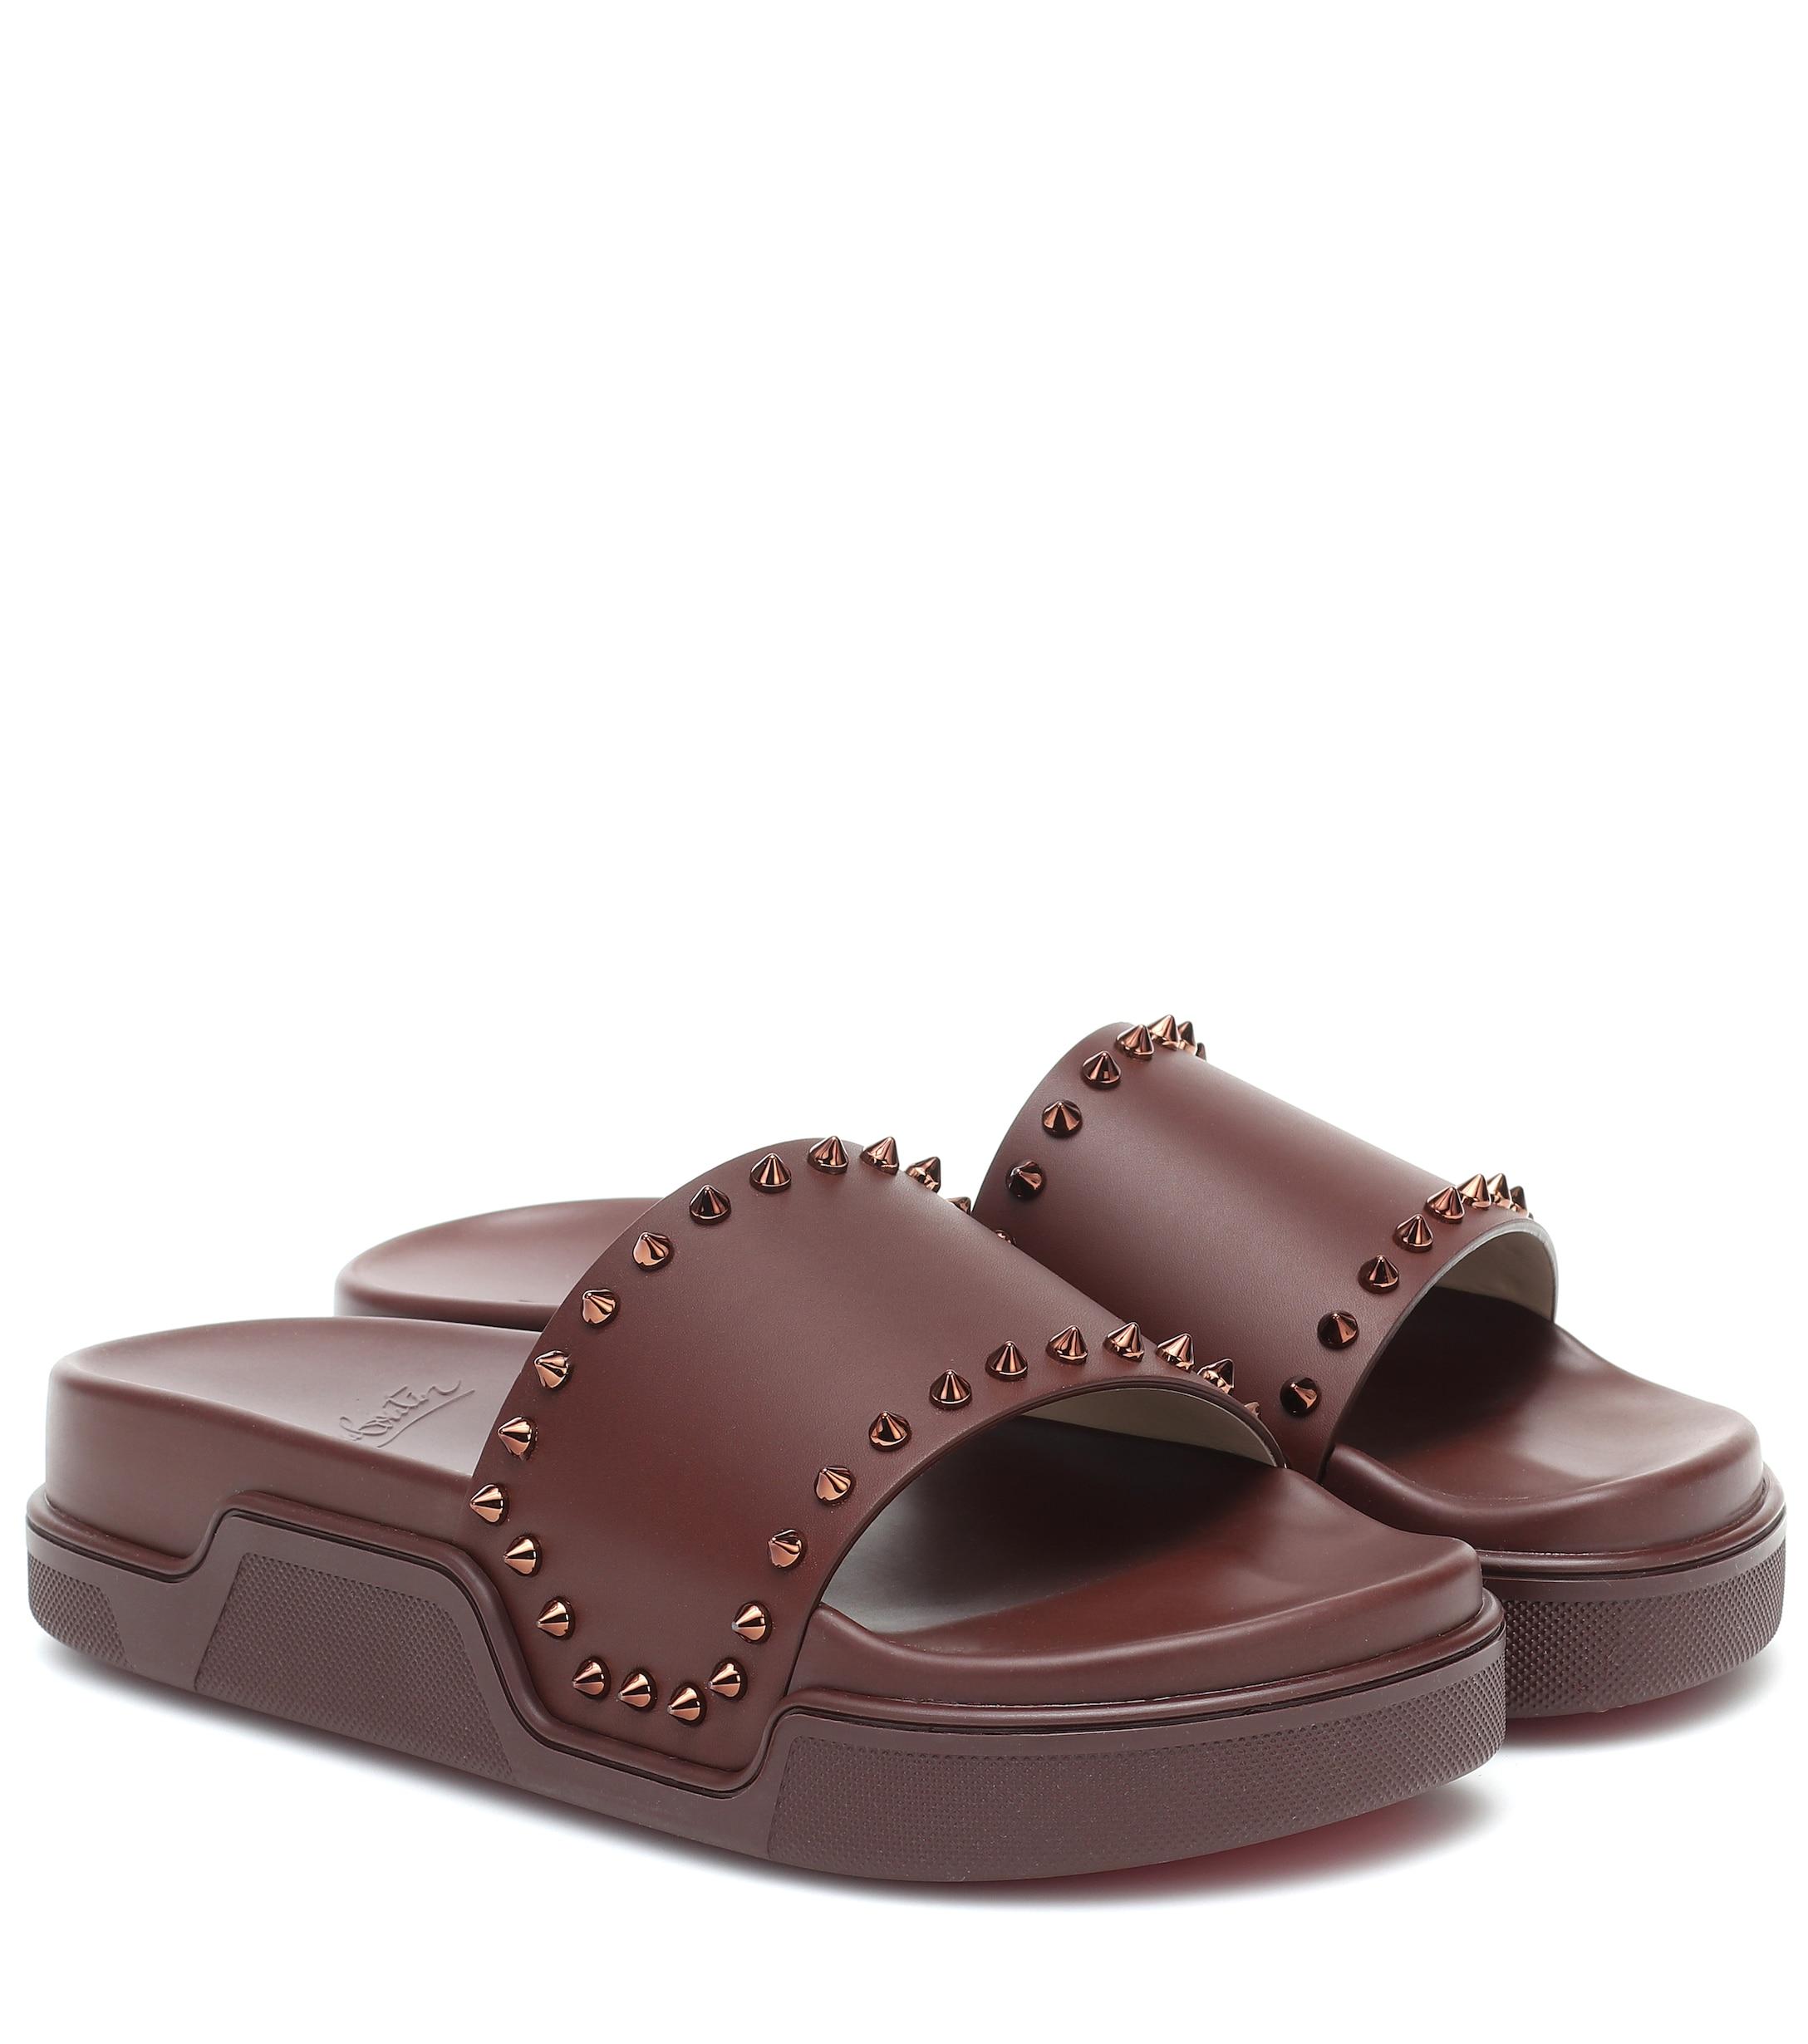 Christian Louboutin Pool Stud Leather Slides in Brown - Lyst